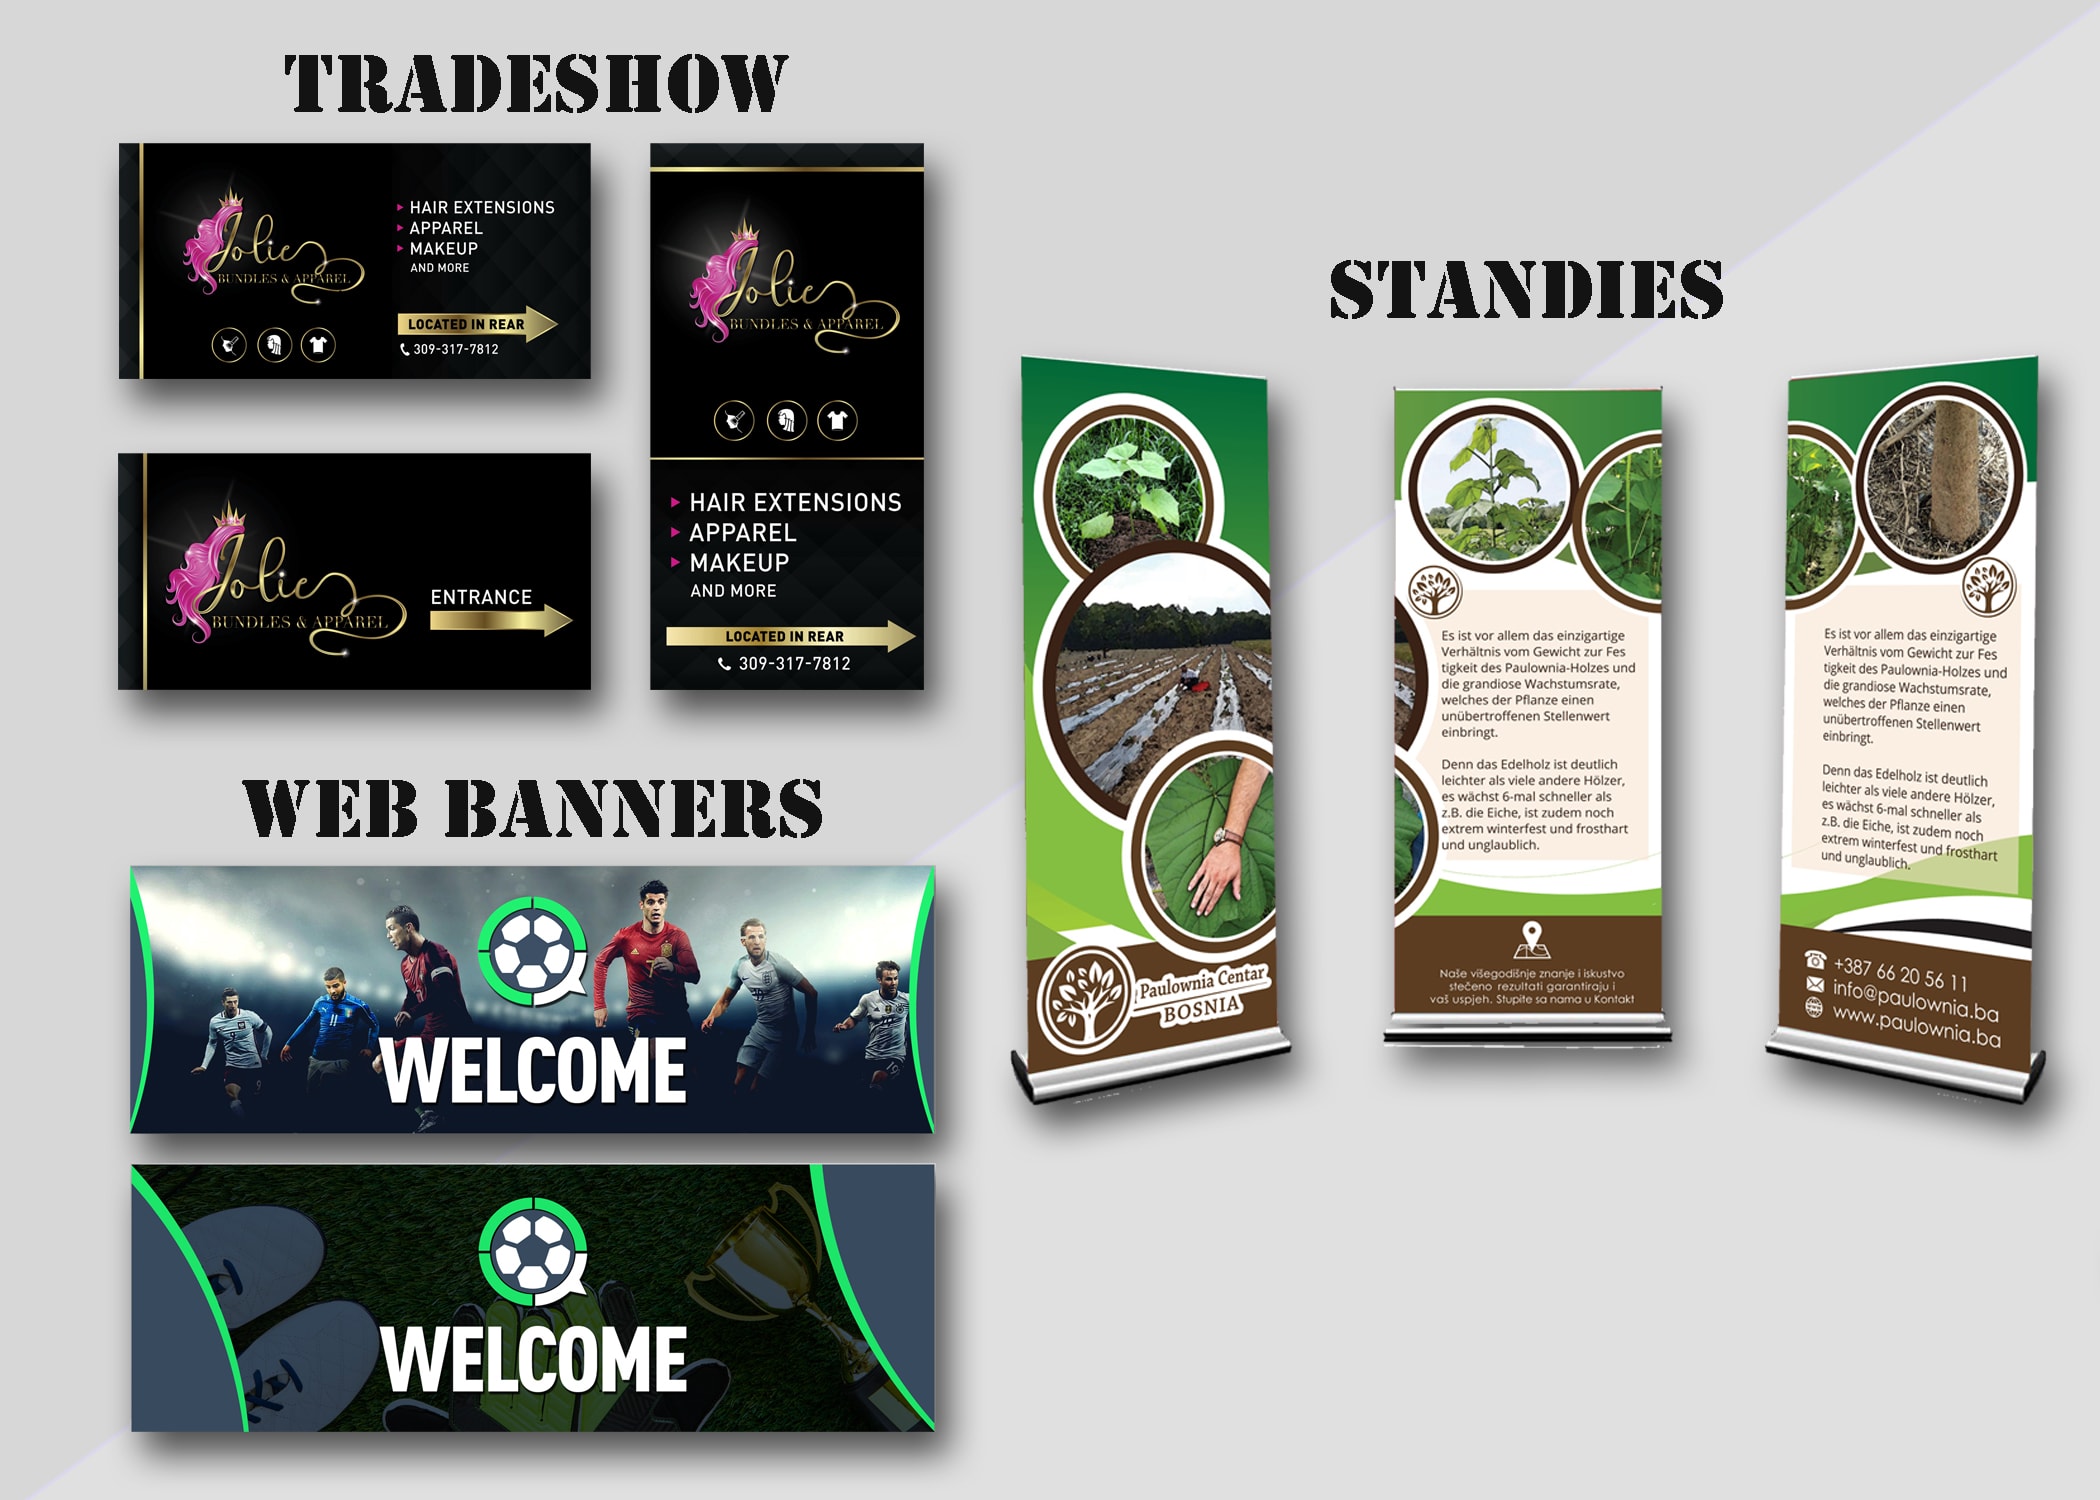 Design Banner Standee Tablecover And Backdrop Booth Banner By Saq Ib